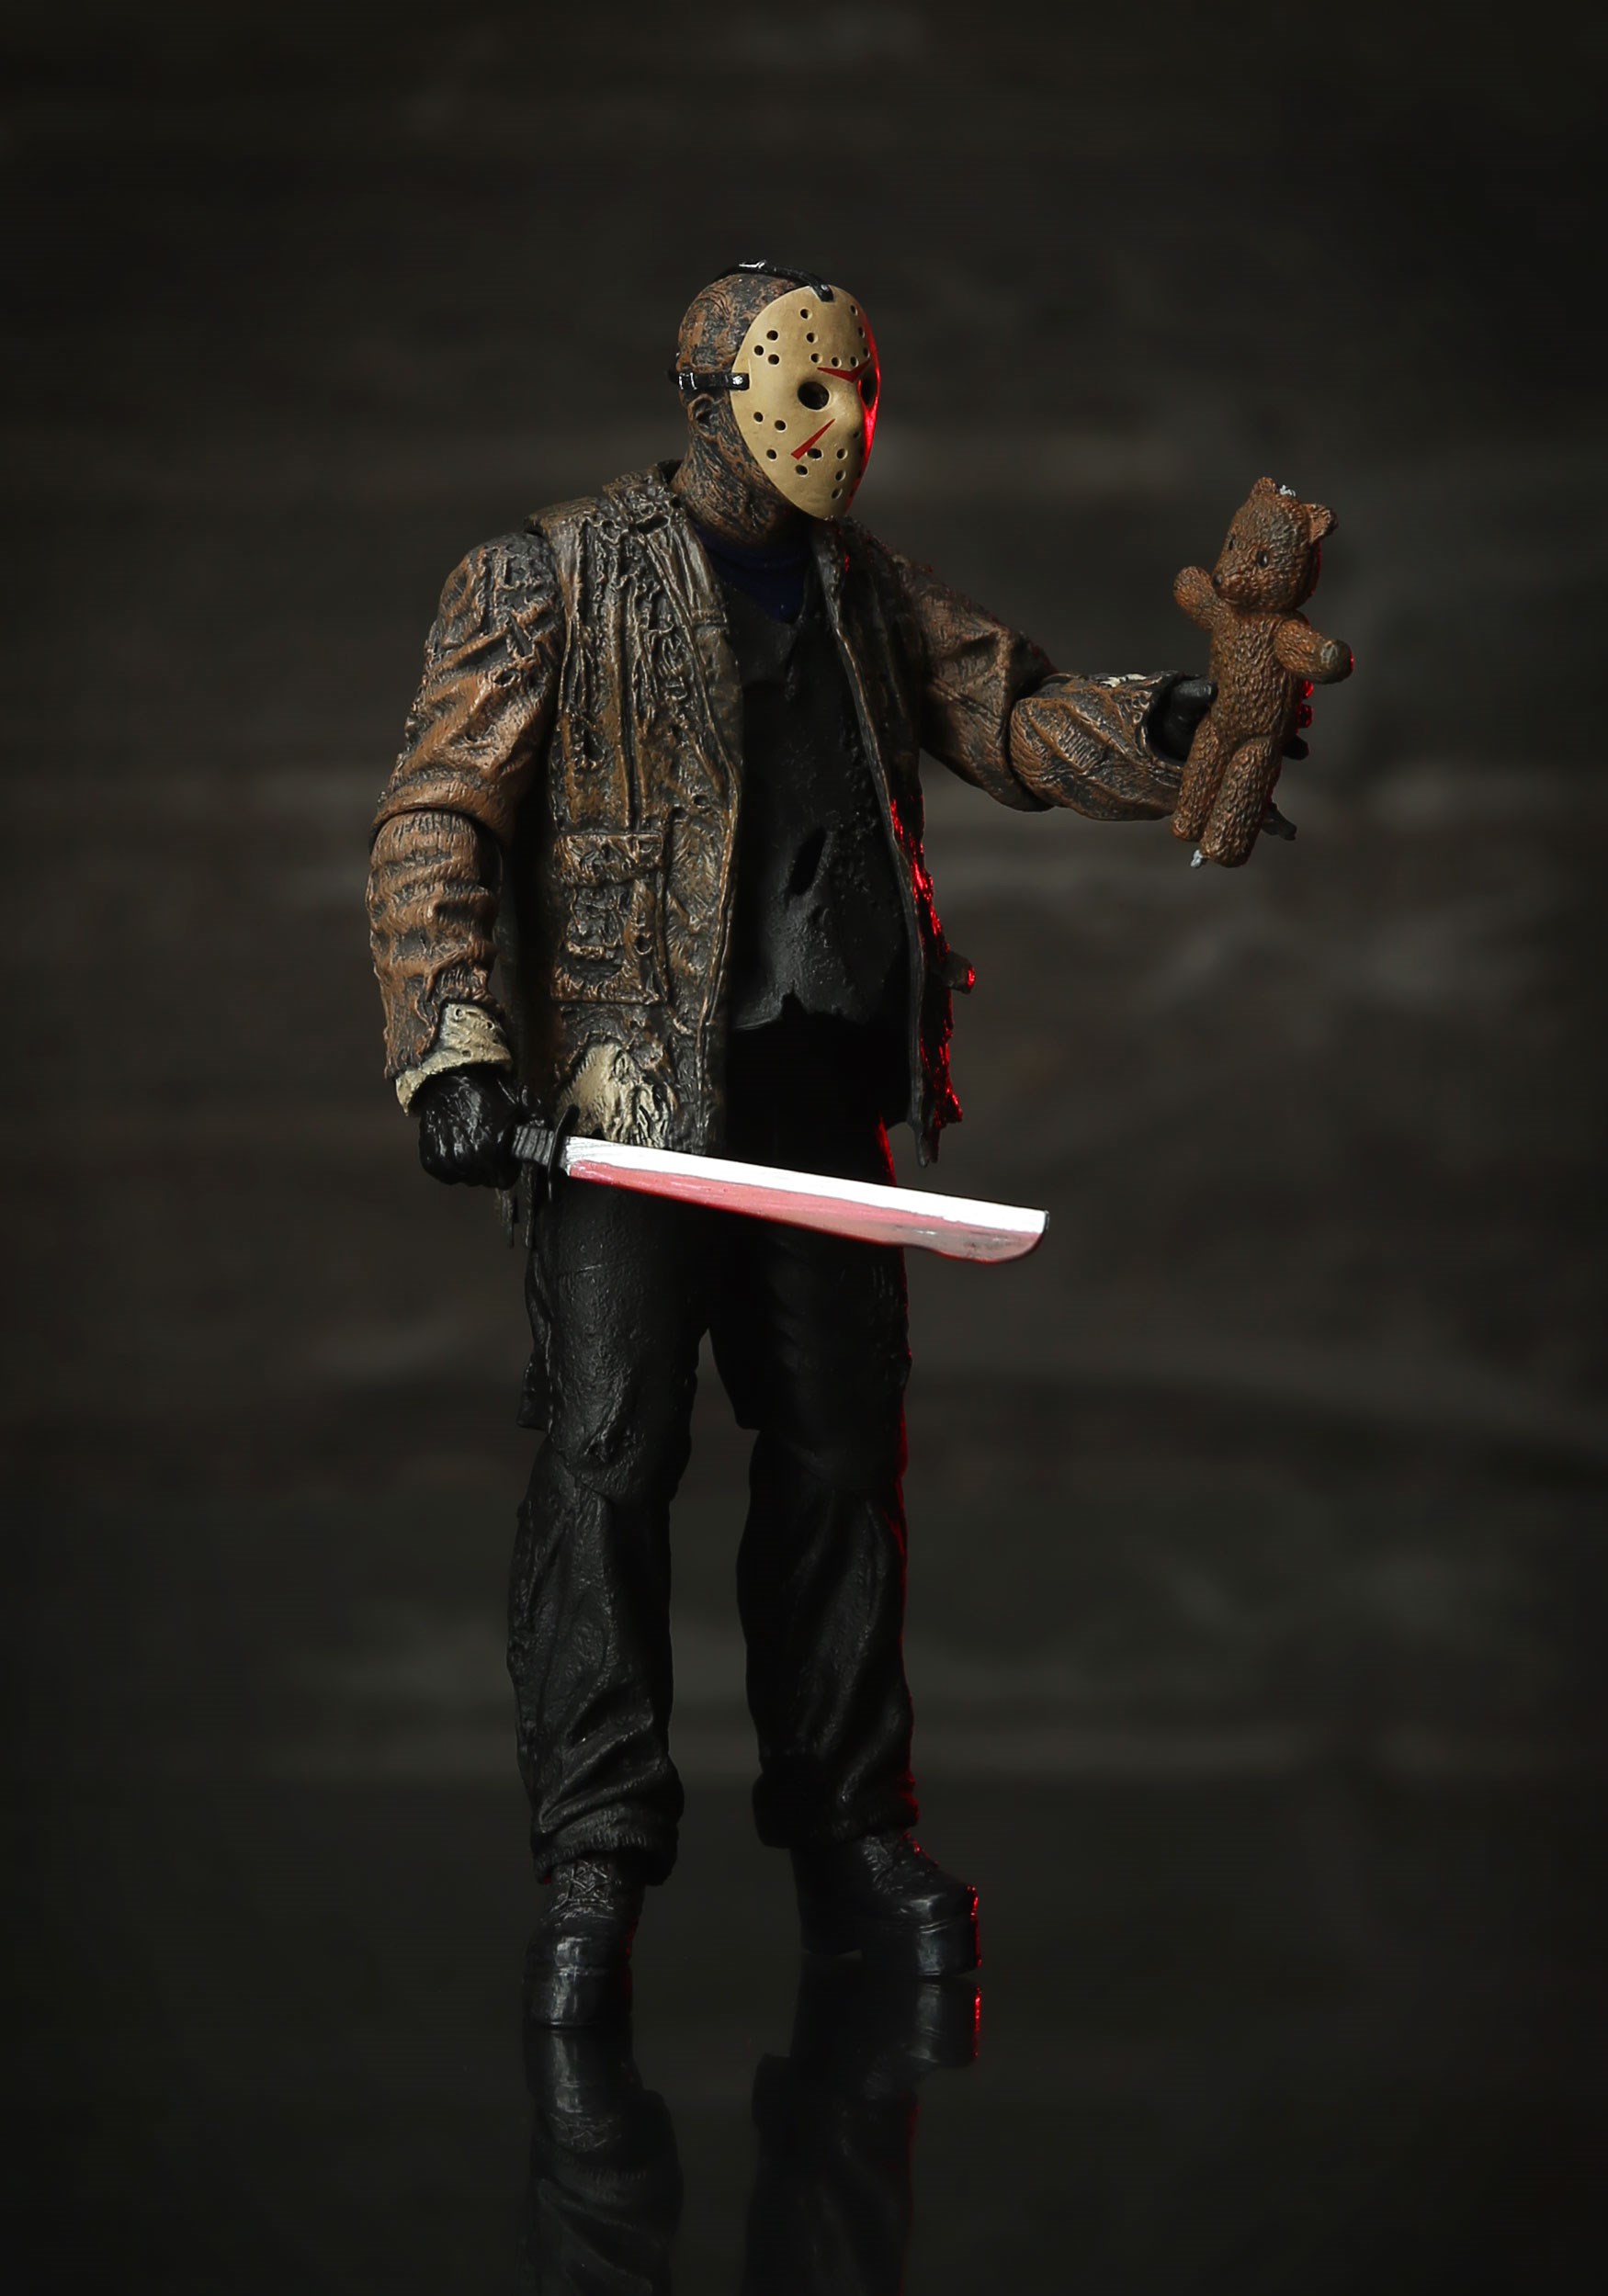 NECA Freddy vs Jason Voorhees Friday the 13th Ultimate Horror Action Figure  Toy